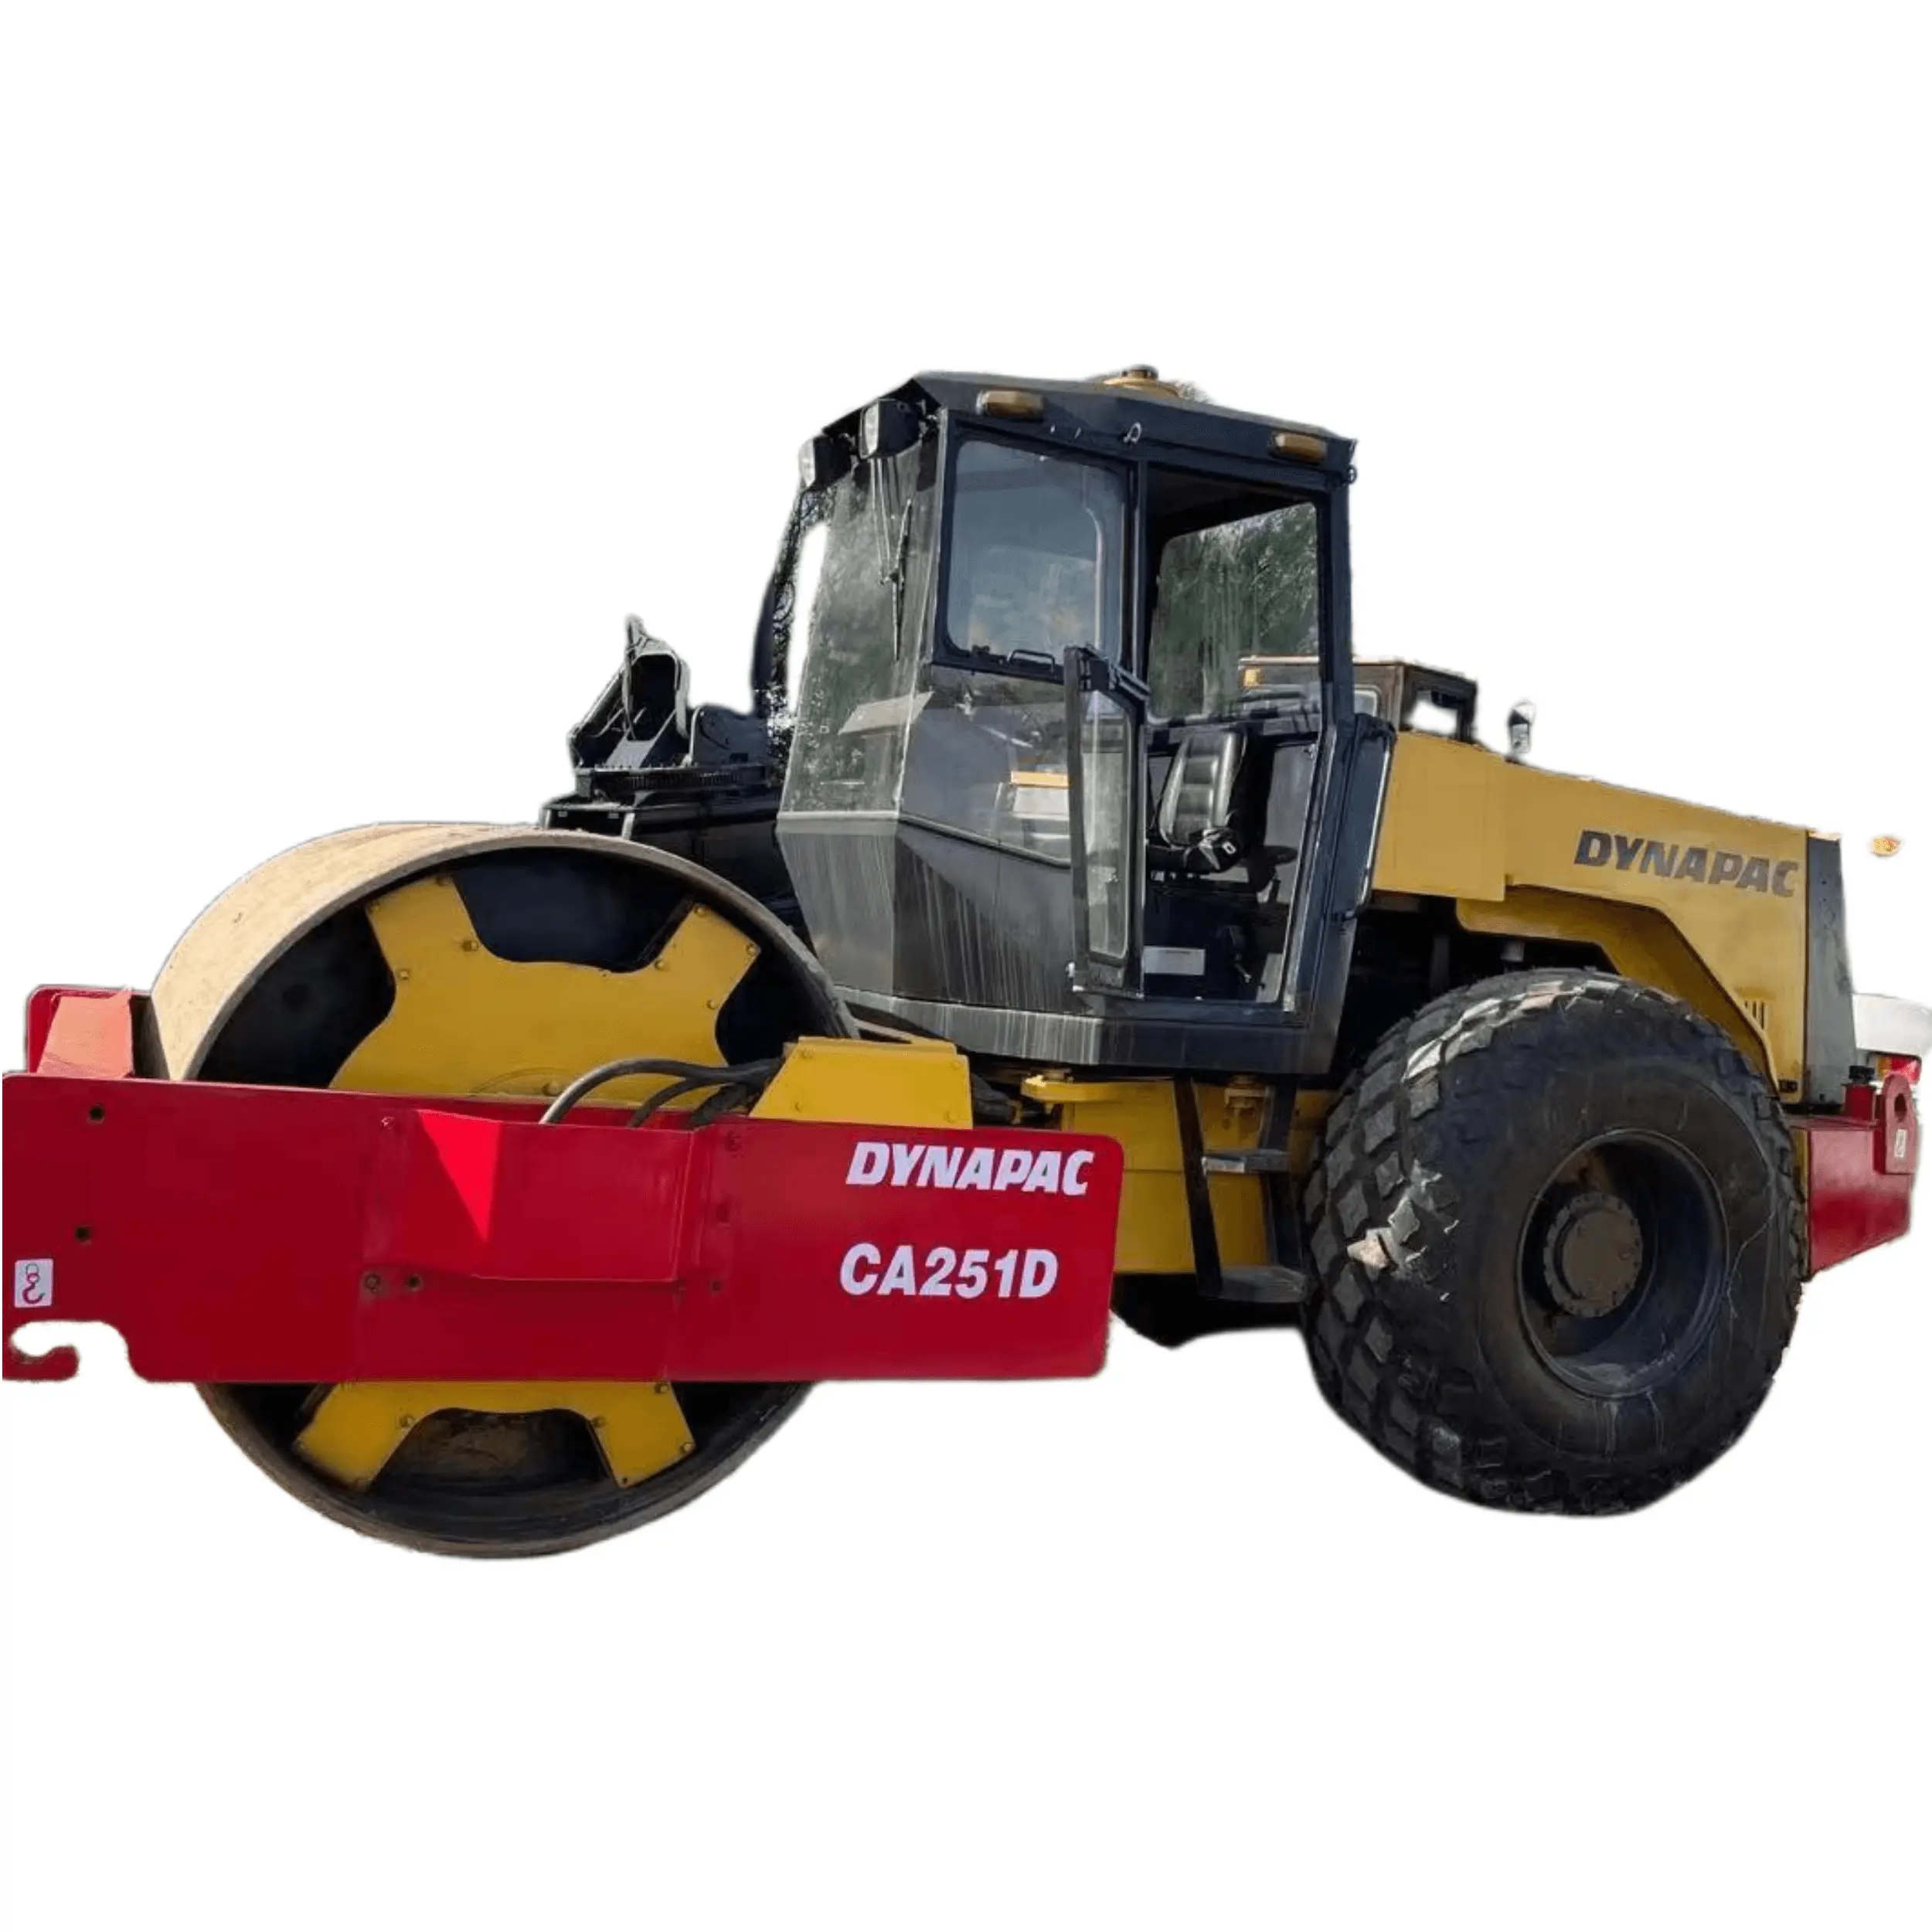 Small Road Roller Compactor Dynapac CA251 CA251D CA25 Used Roller Press Construction Machine